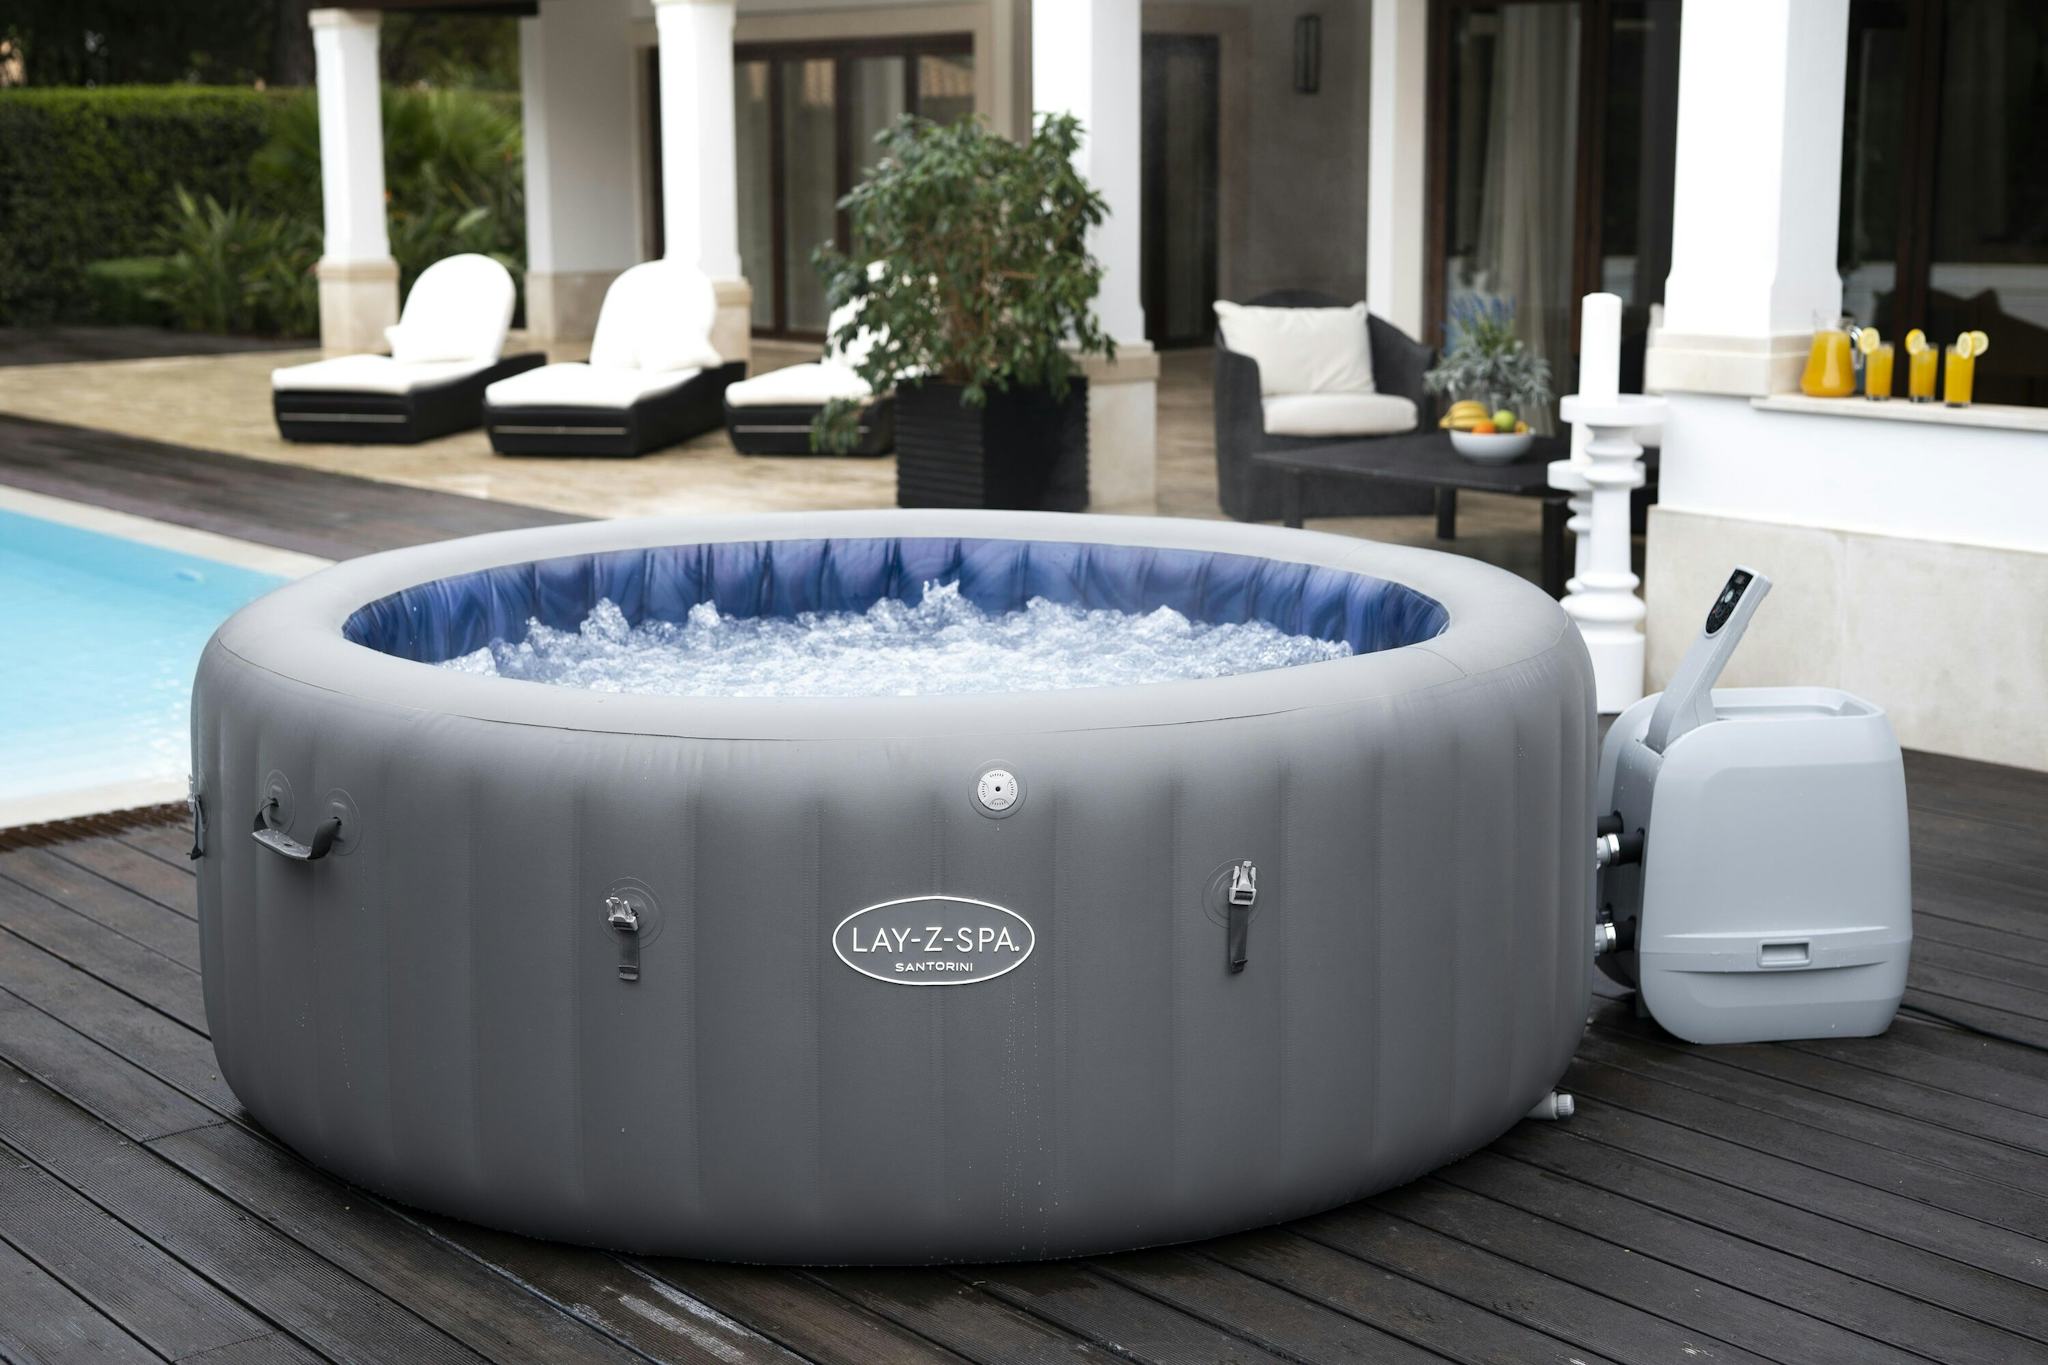 Spas Gonflables Spa gonflable rond Lay-Z-Spa Santorini Hydrojet pro™ 5 - 7 personnes Bestway 17